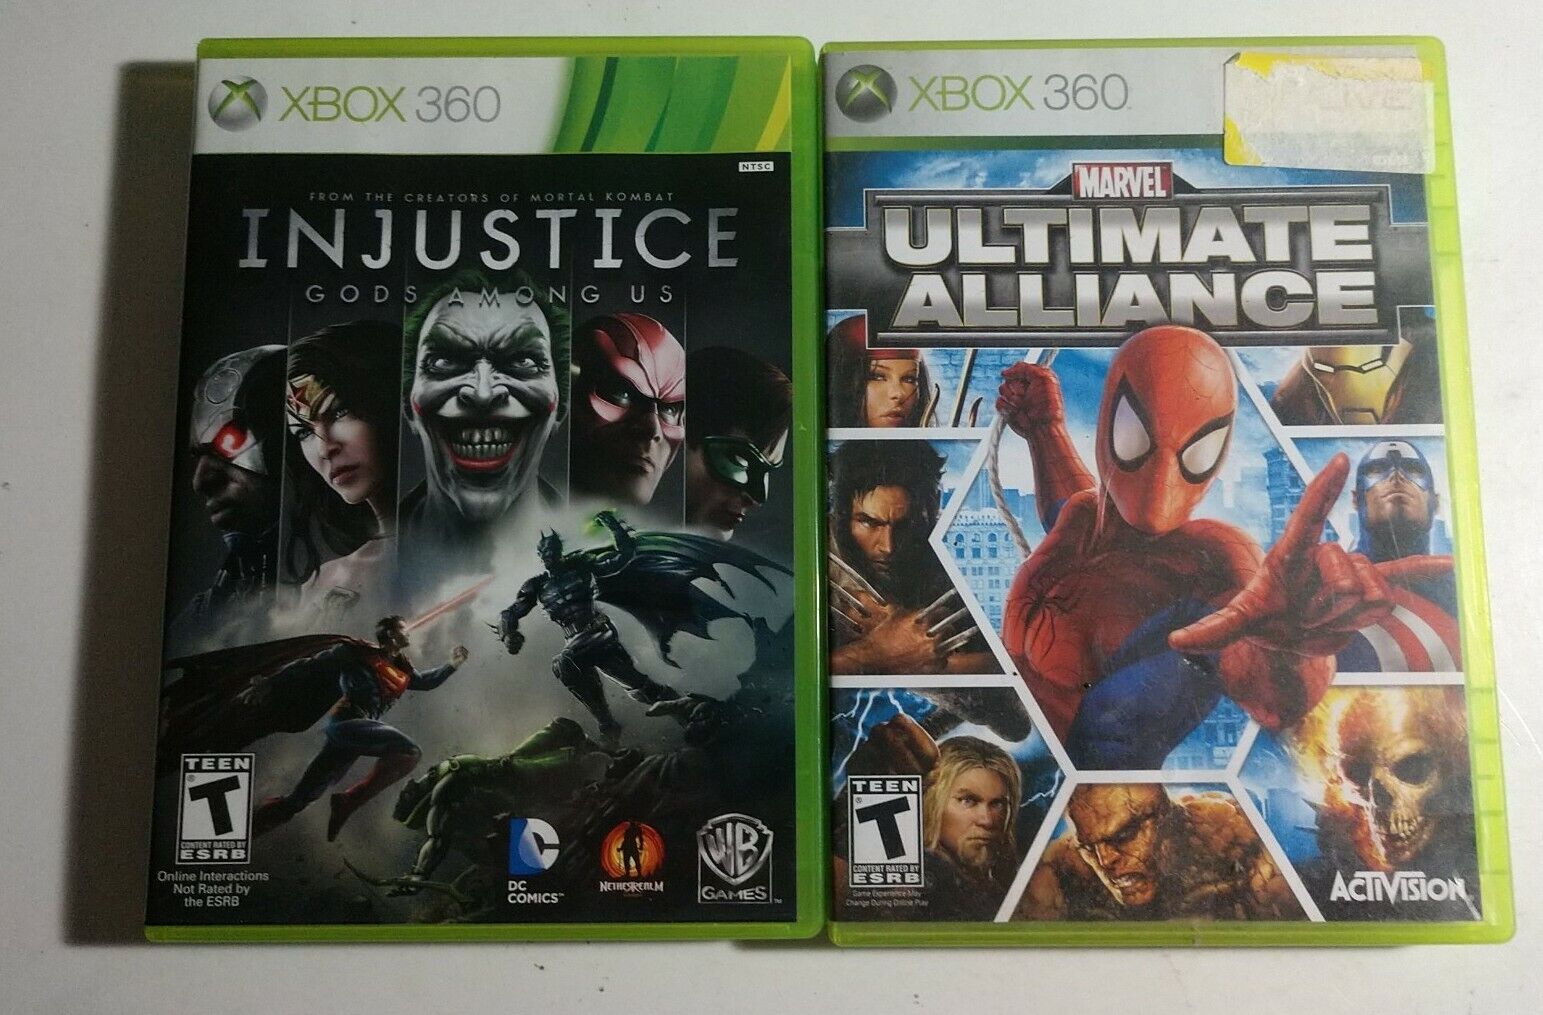 Lot of 2 Xbox 360 video games. 1. Ultimate Alliance 2. Injustice Gods among  us.